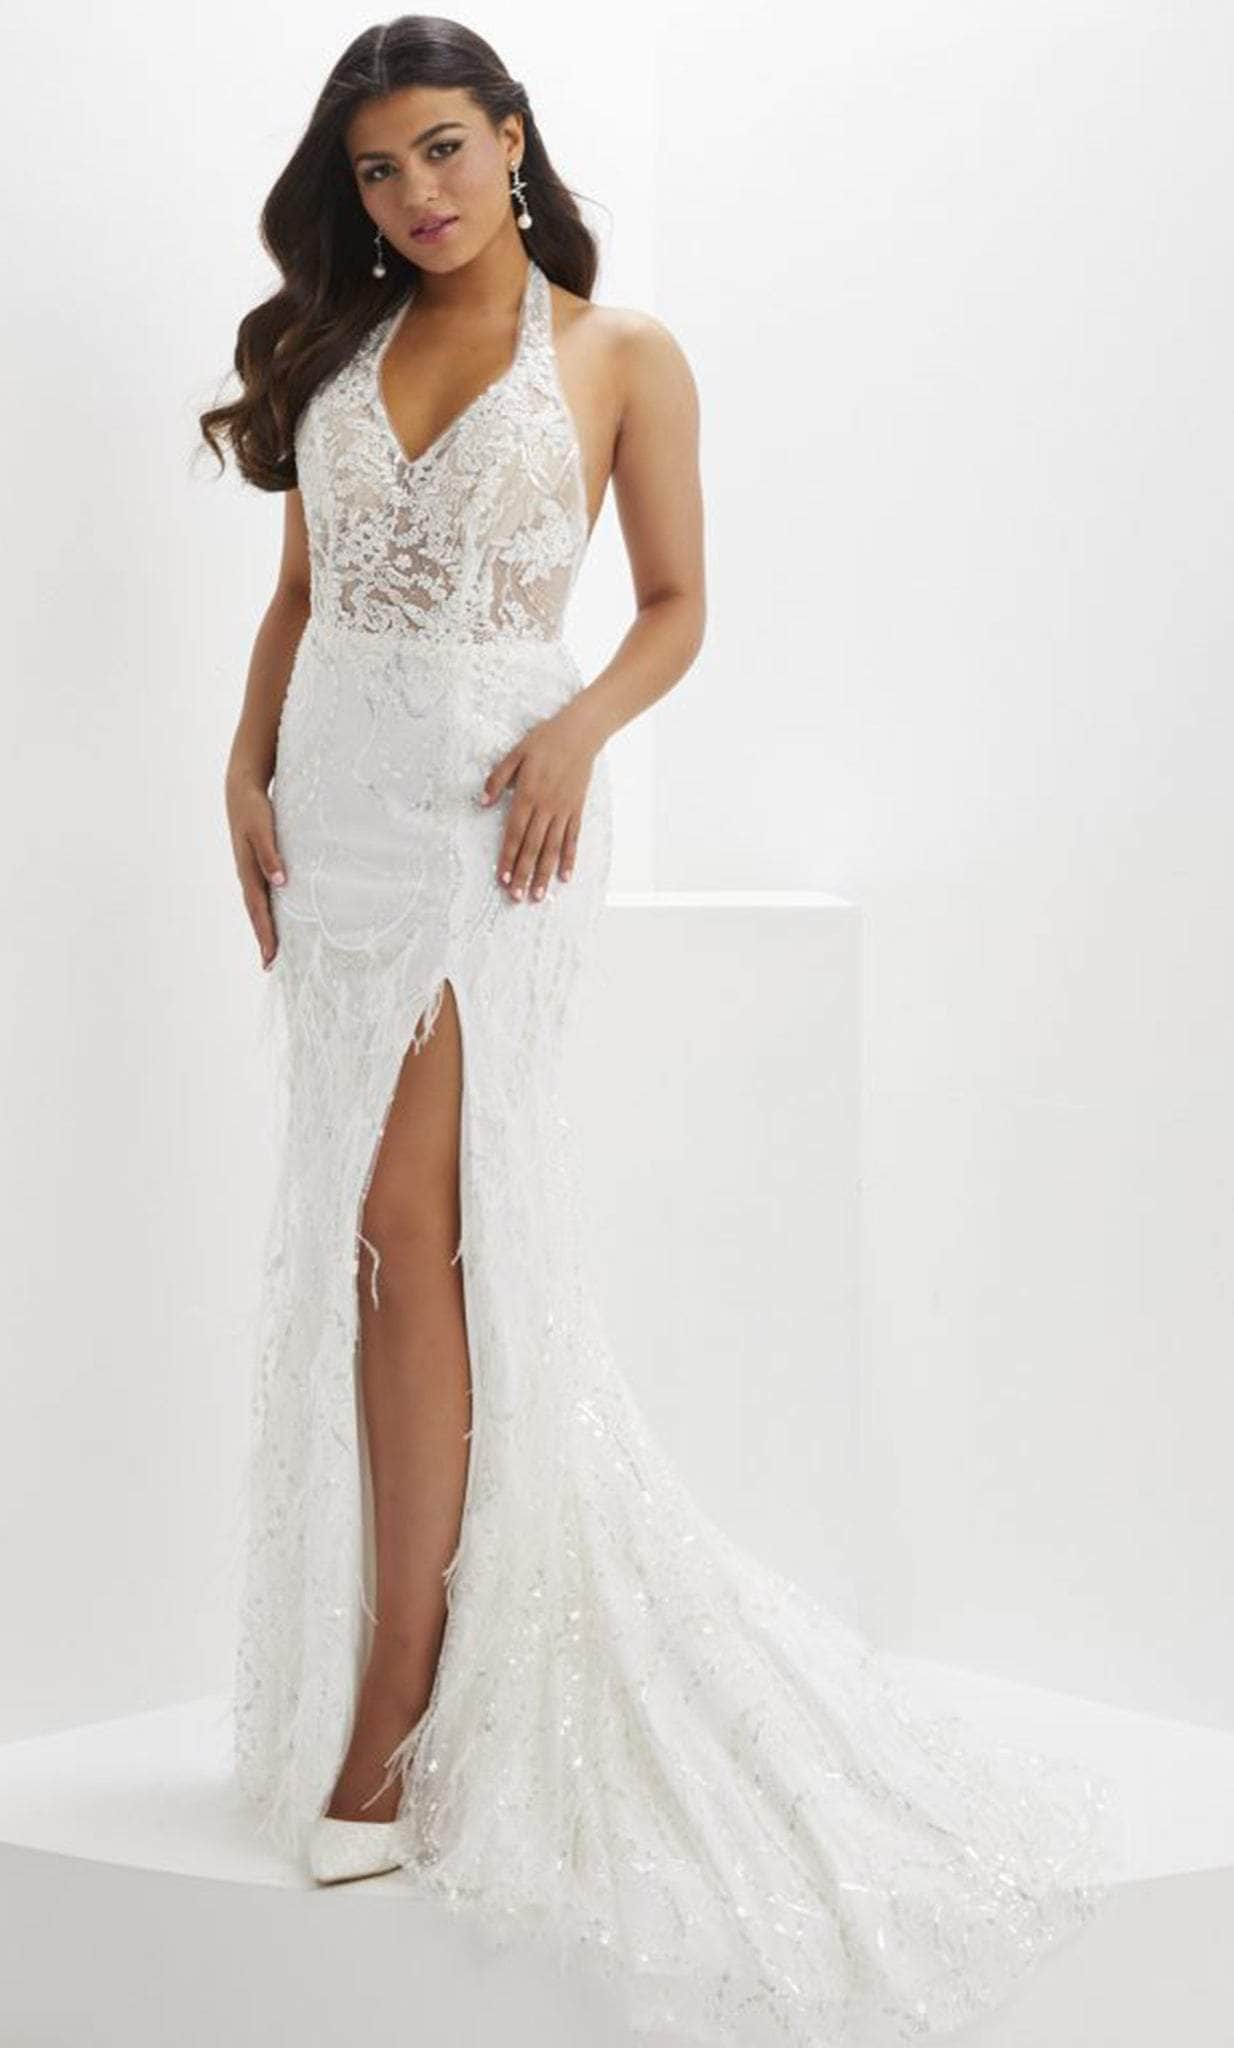 Panoply 14144 - Halter Beaded Lace Evening Gown
